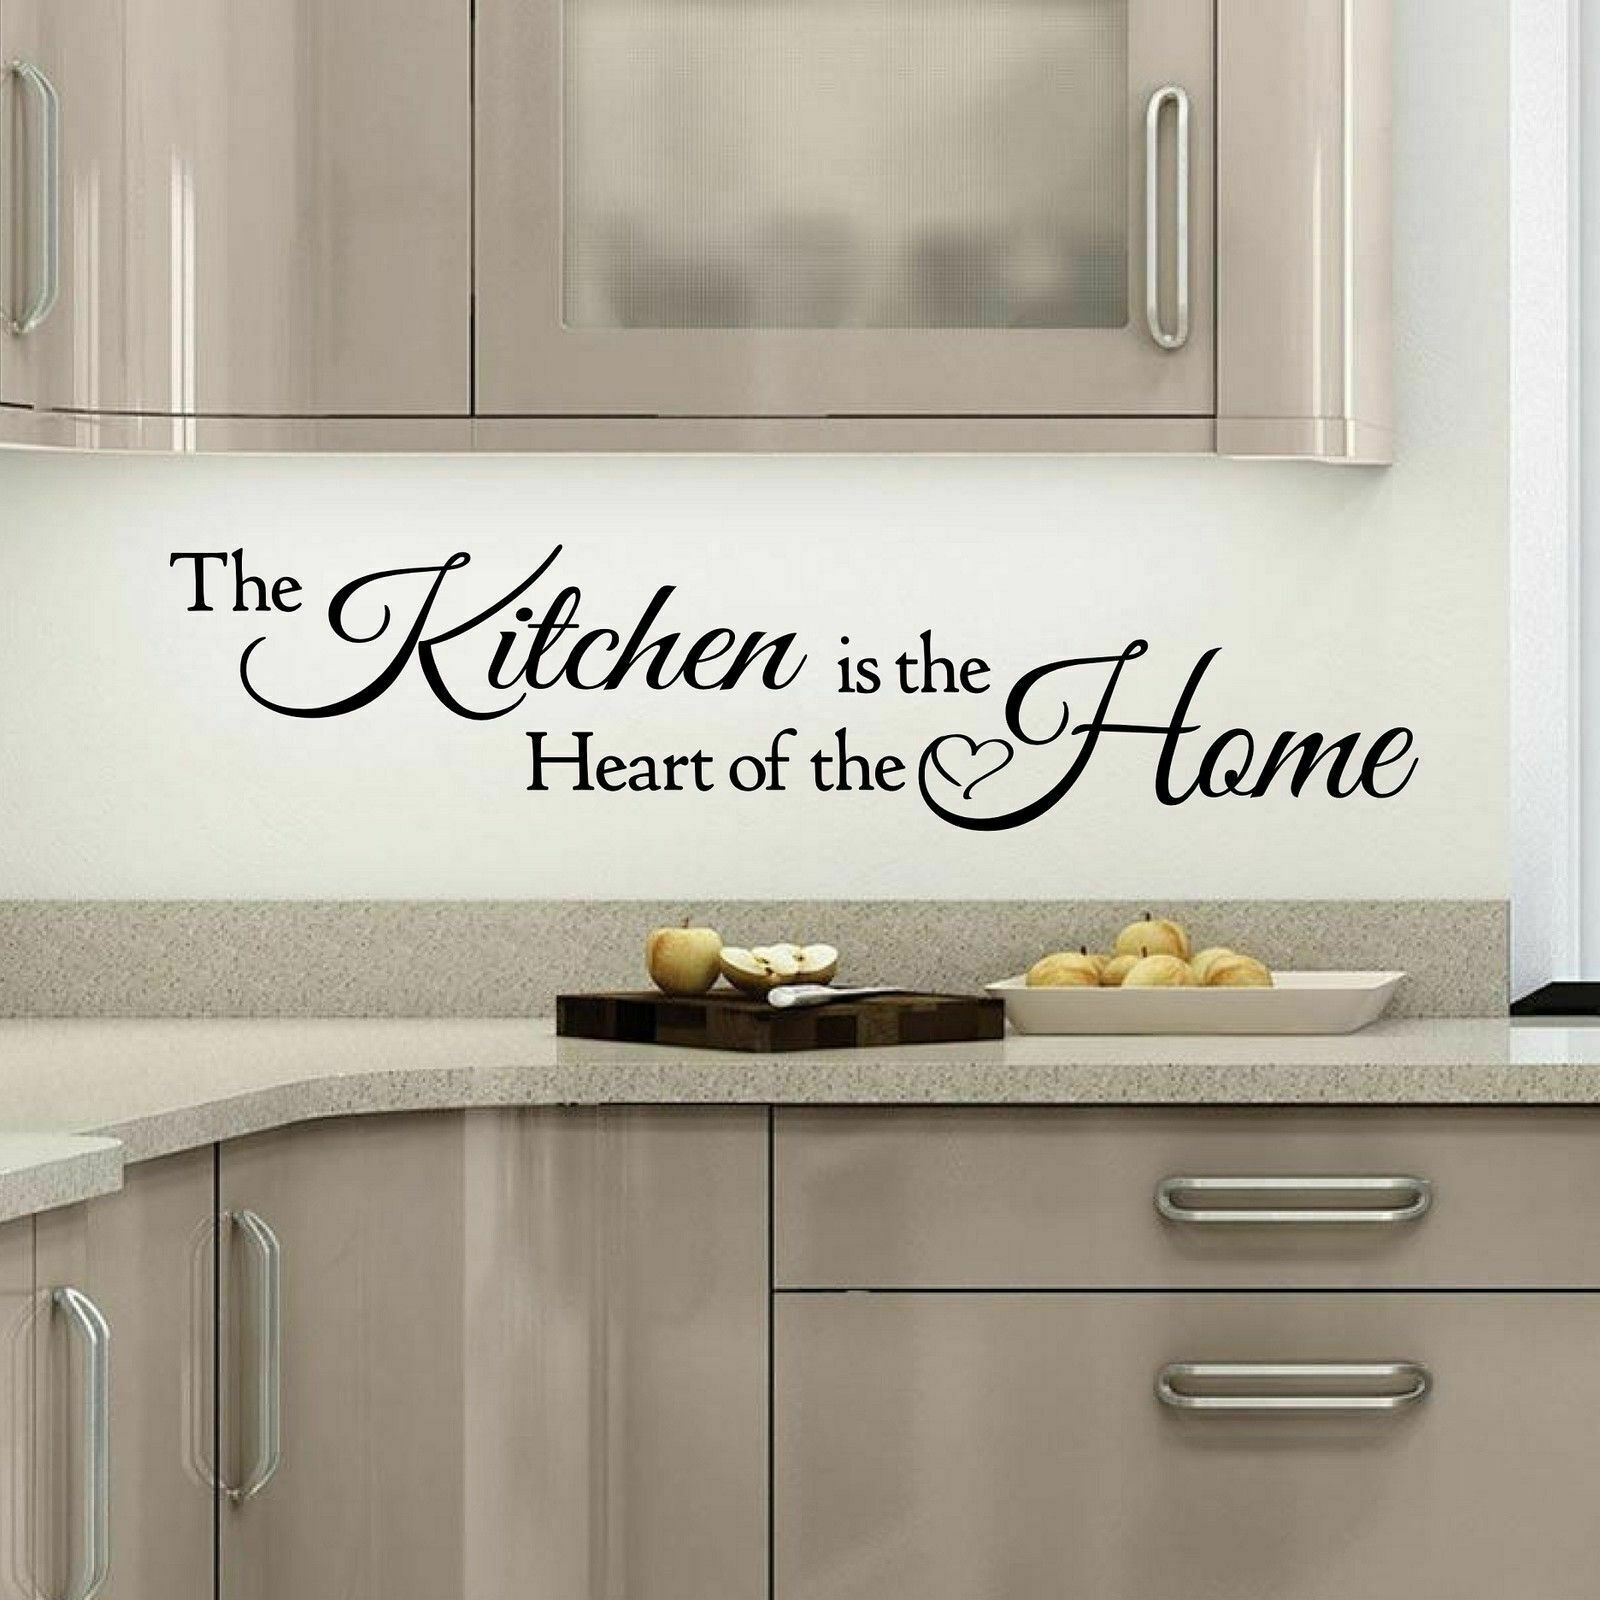 Wall Stickers Quotes The Kitchen is a Heart of the Home Art Decal removable DIY